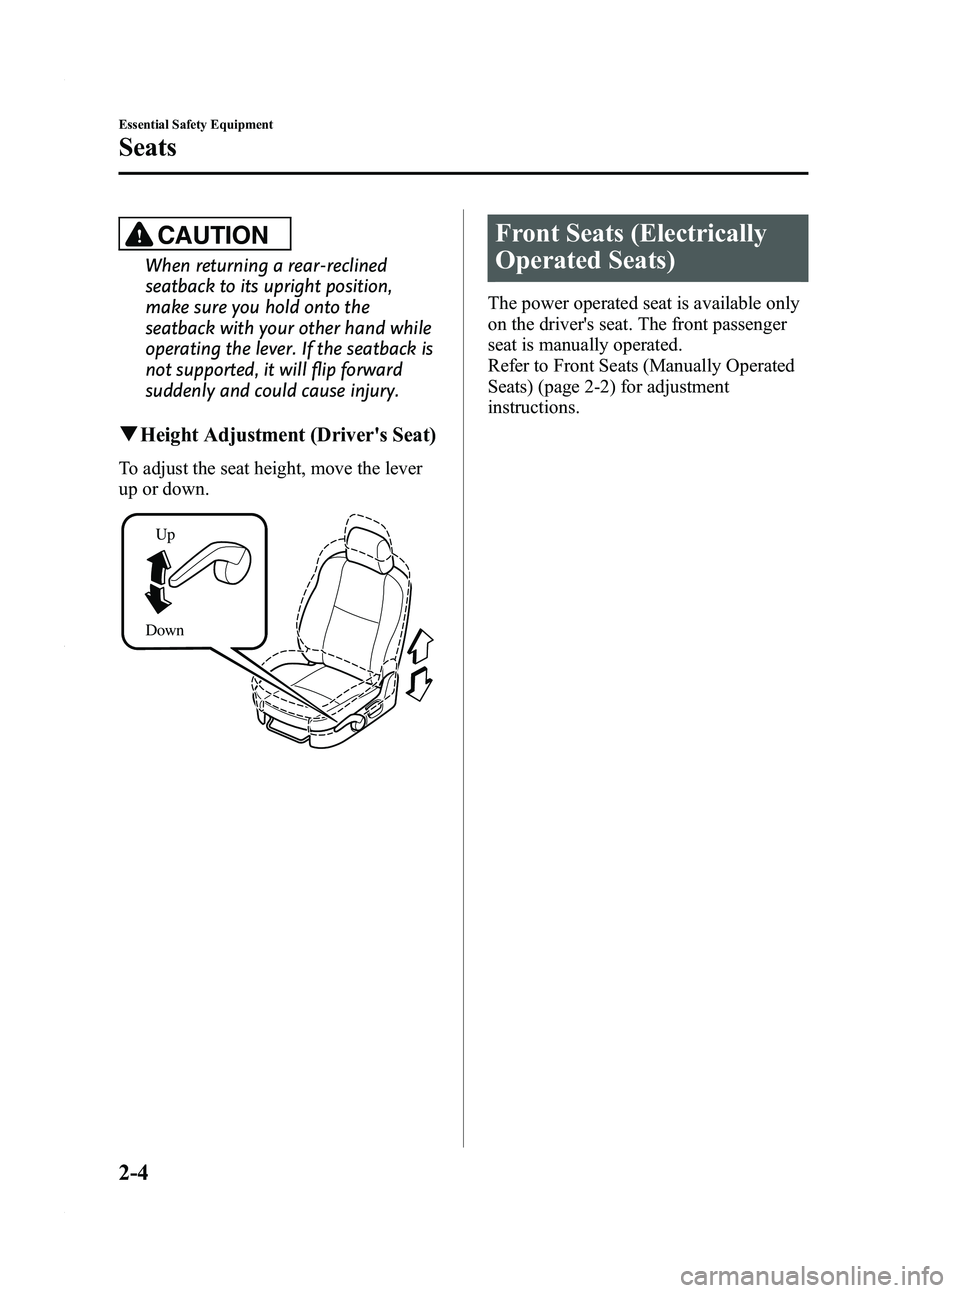 MAZDA MODEL 3 5-DOOR 2012 User Guide Black plate (18,1)
CAUTION
When returning a rear-reclined
seatback to its upright position,
make sure you hold onto the
seatback with your other hand while
operating the lever. If the seatback is
not 